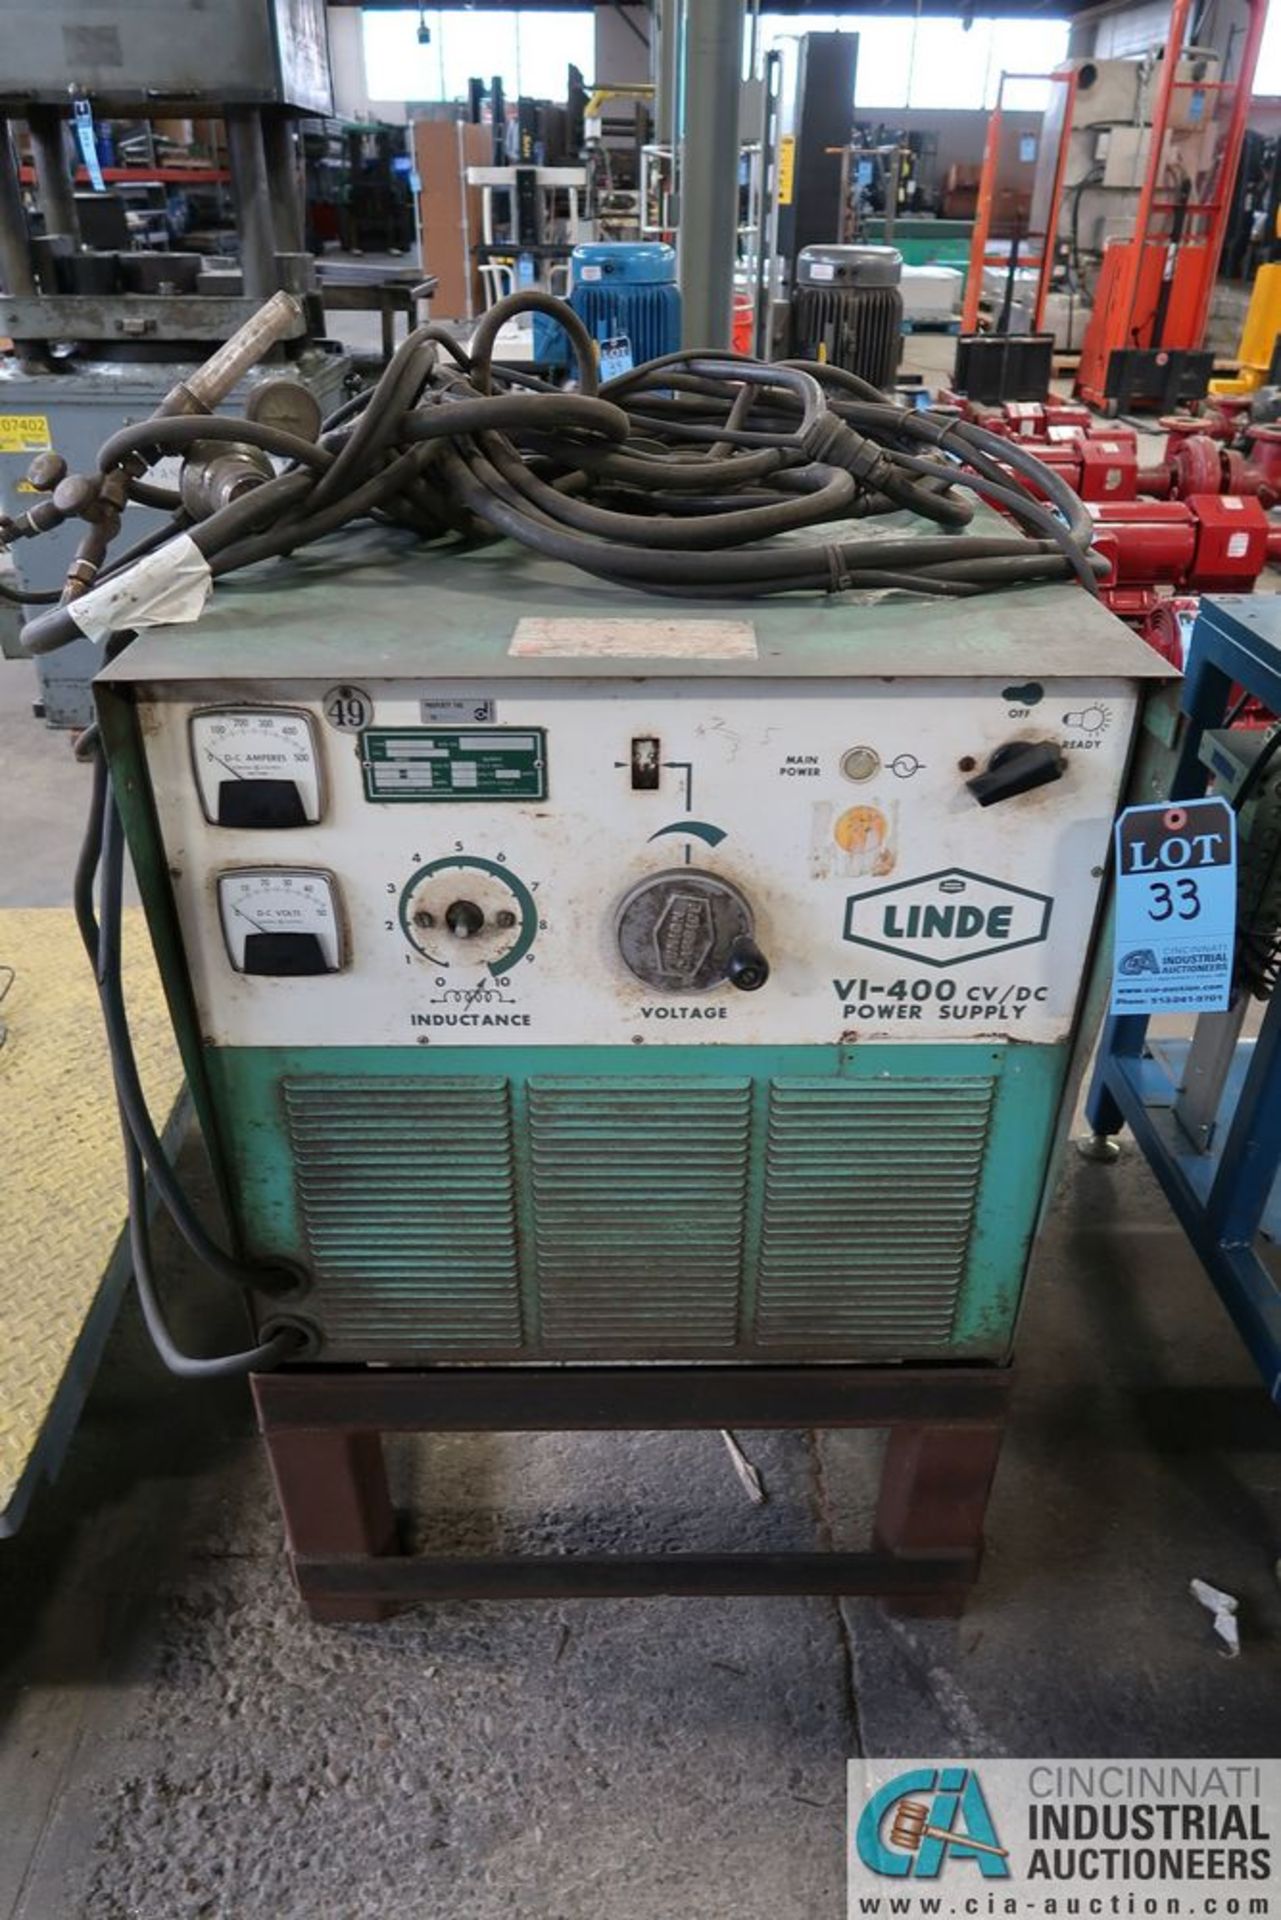 400 AMP LINDE MODEL V1400 CV-DC WELDING POWER SUPPLY; S/N D80D16993, WITH STAND, 3 PHASE, 230/460 - Image 2 of 5